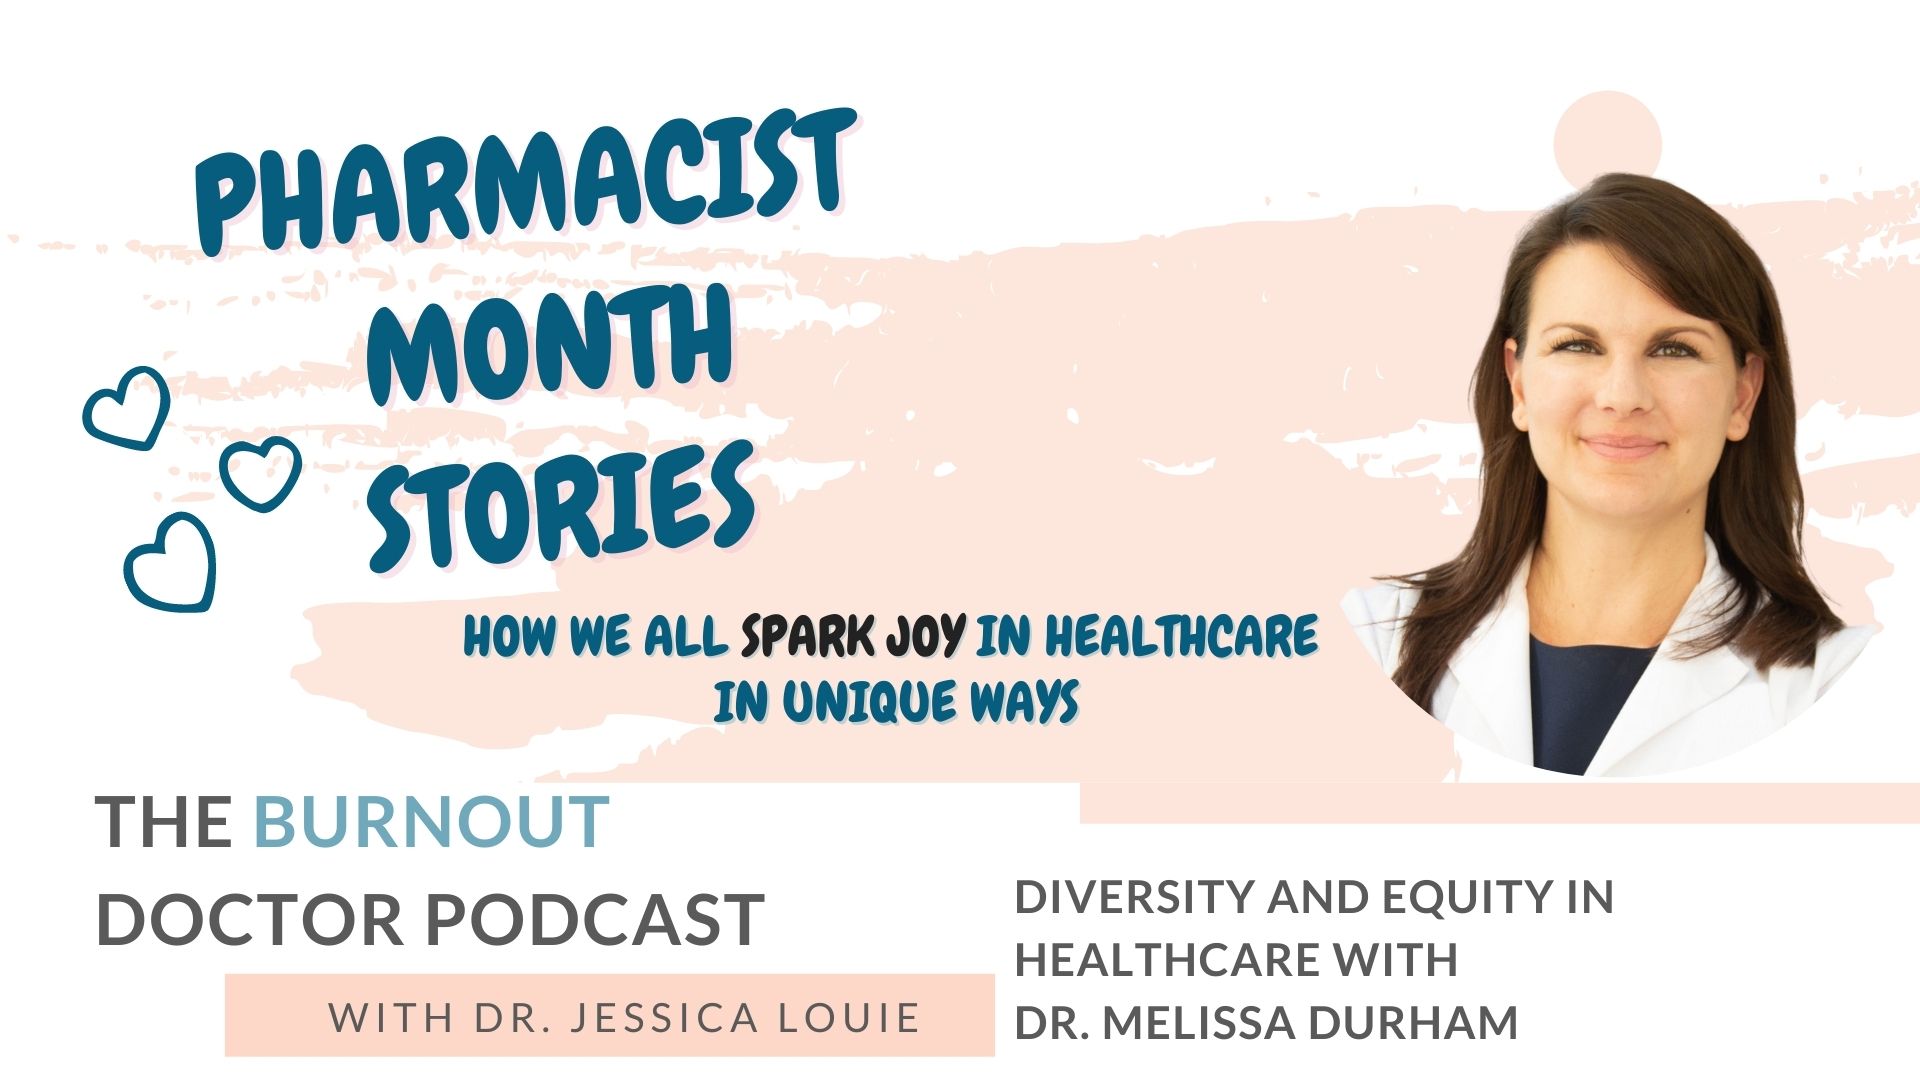 Dr. Melissa Durham on The Burnout Doctor Podcast. Pharmacist burnout stories with Dr. Jessica Louie. Your Pharmacist Advocate. Spark Joy in Healthcare. Joy at Work. KonMari Pain pharmacist. Diversity inclusion equity. Simplifying in healthcare.